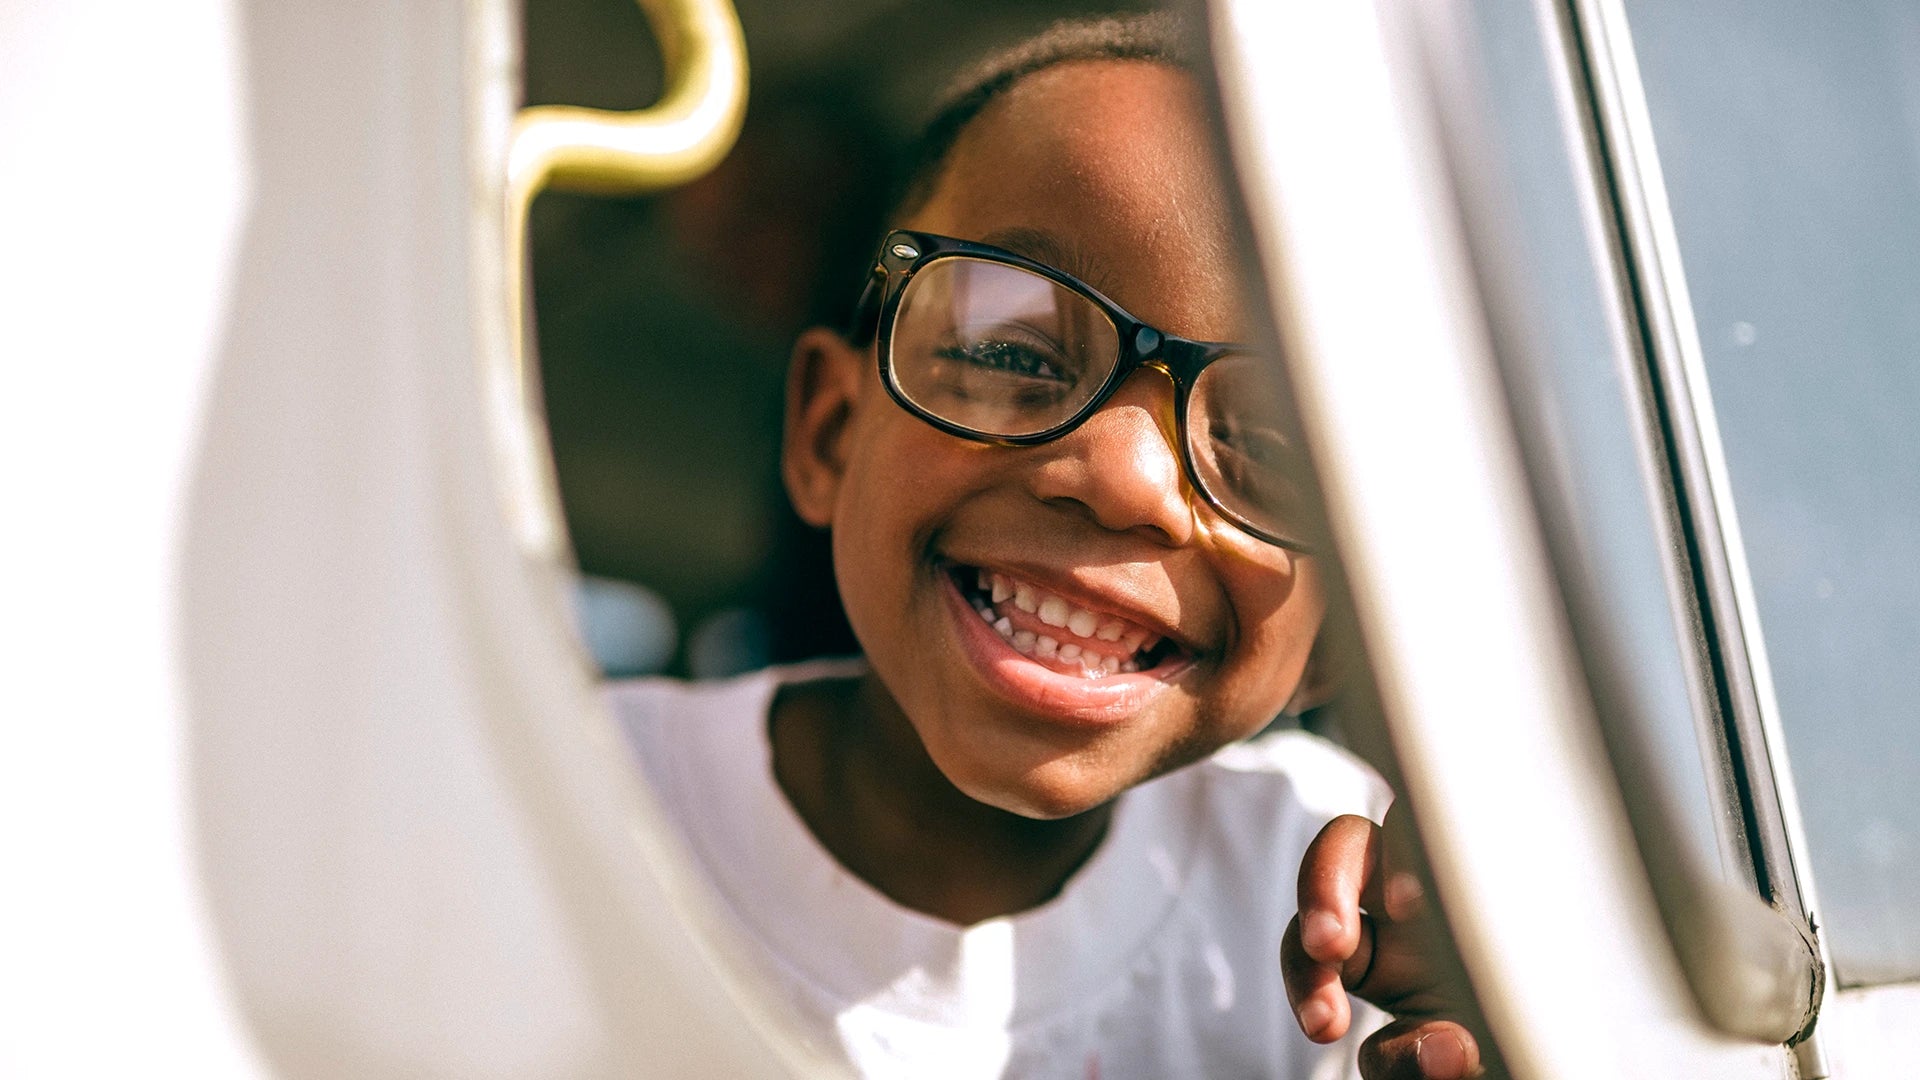 Smiling boy with glasses